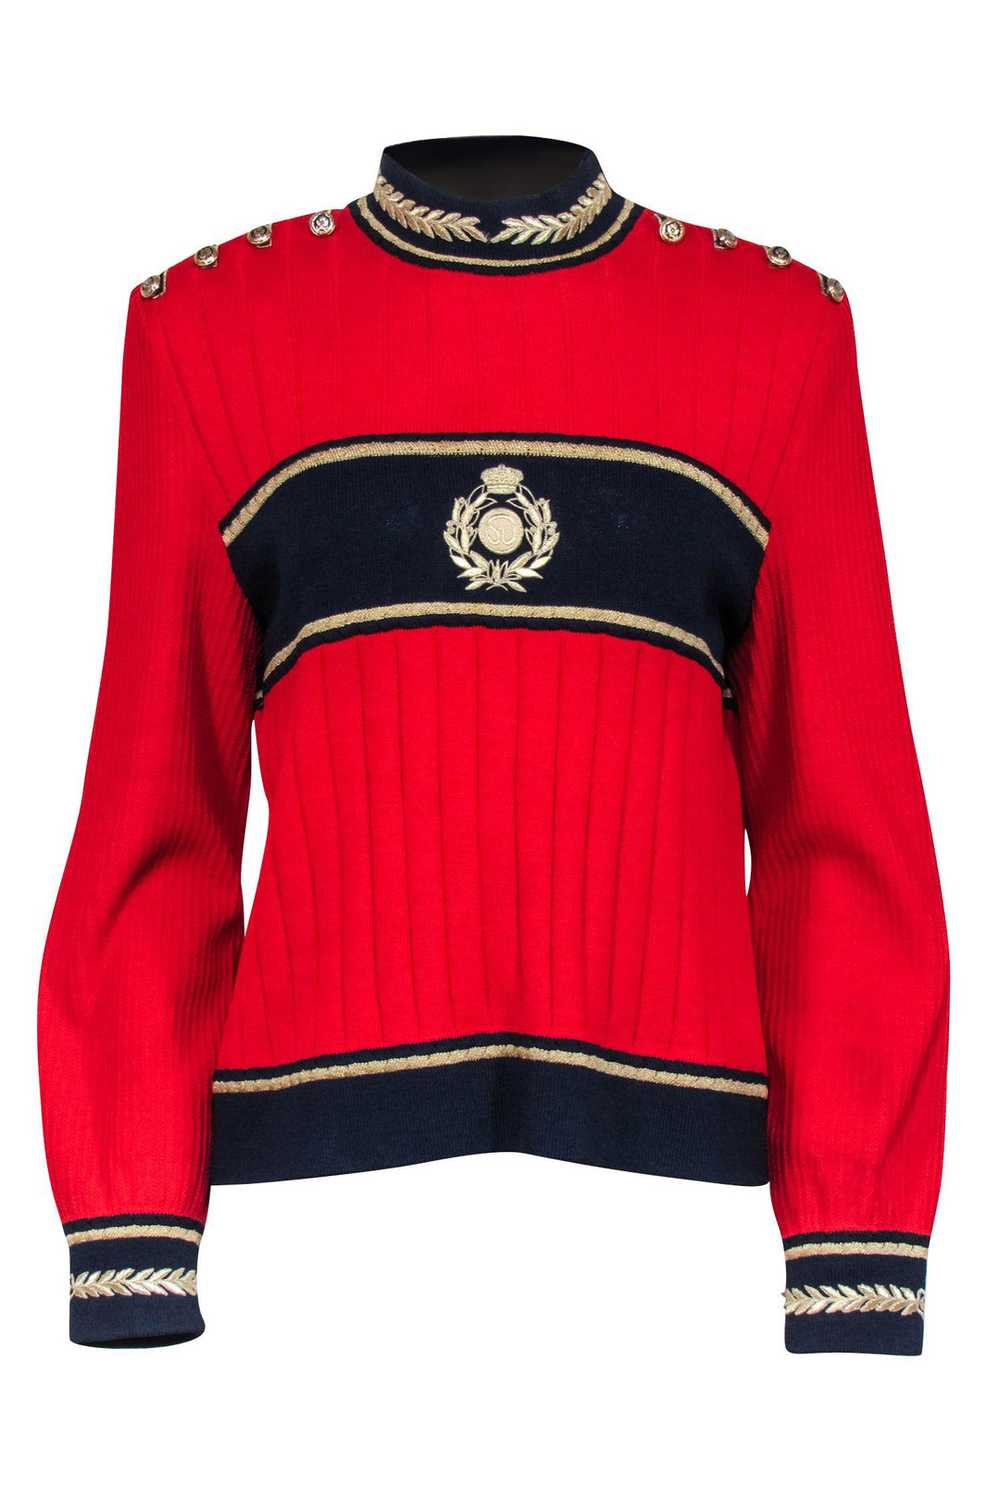 St. John - Red Knit Sweater w/ Gold & Navy Detail… - image 1